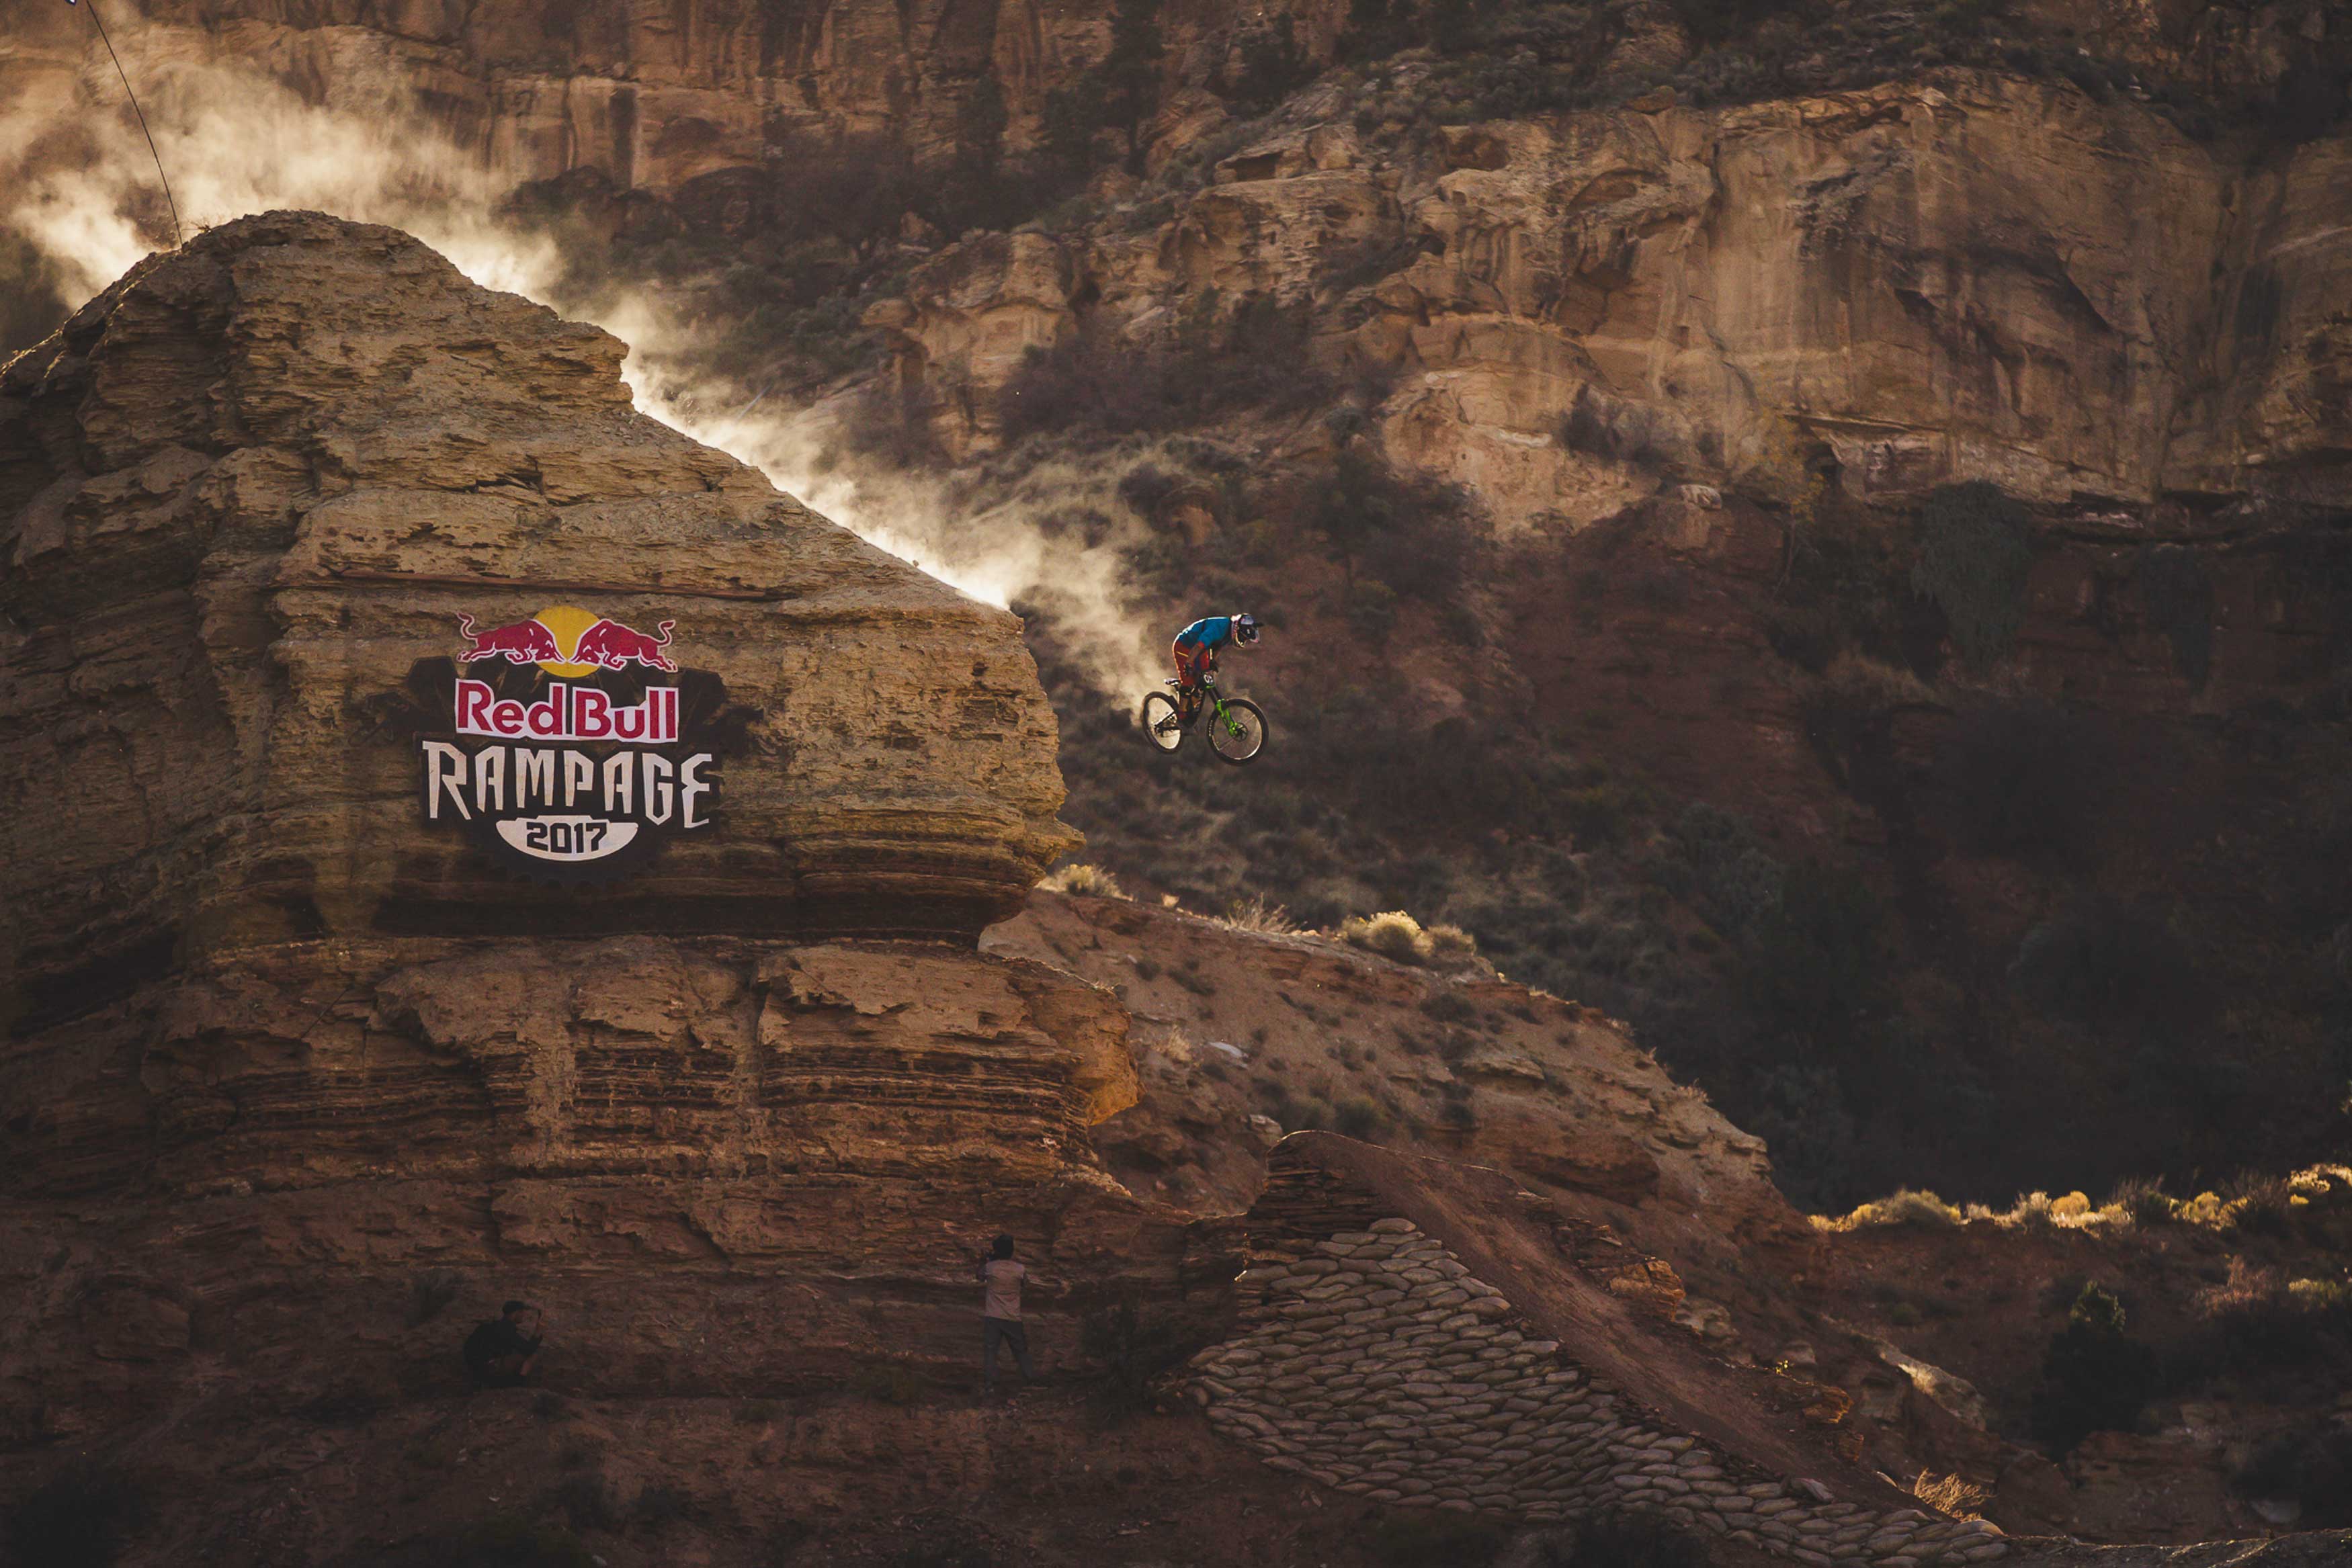 This. Is. RED BULL RAMPAGE! 2017 in Pictures